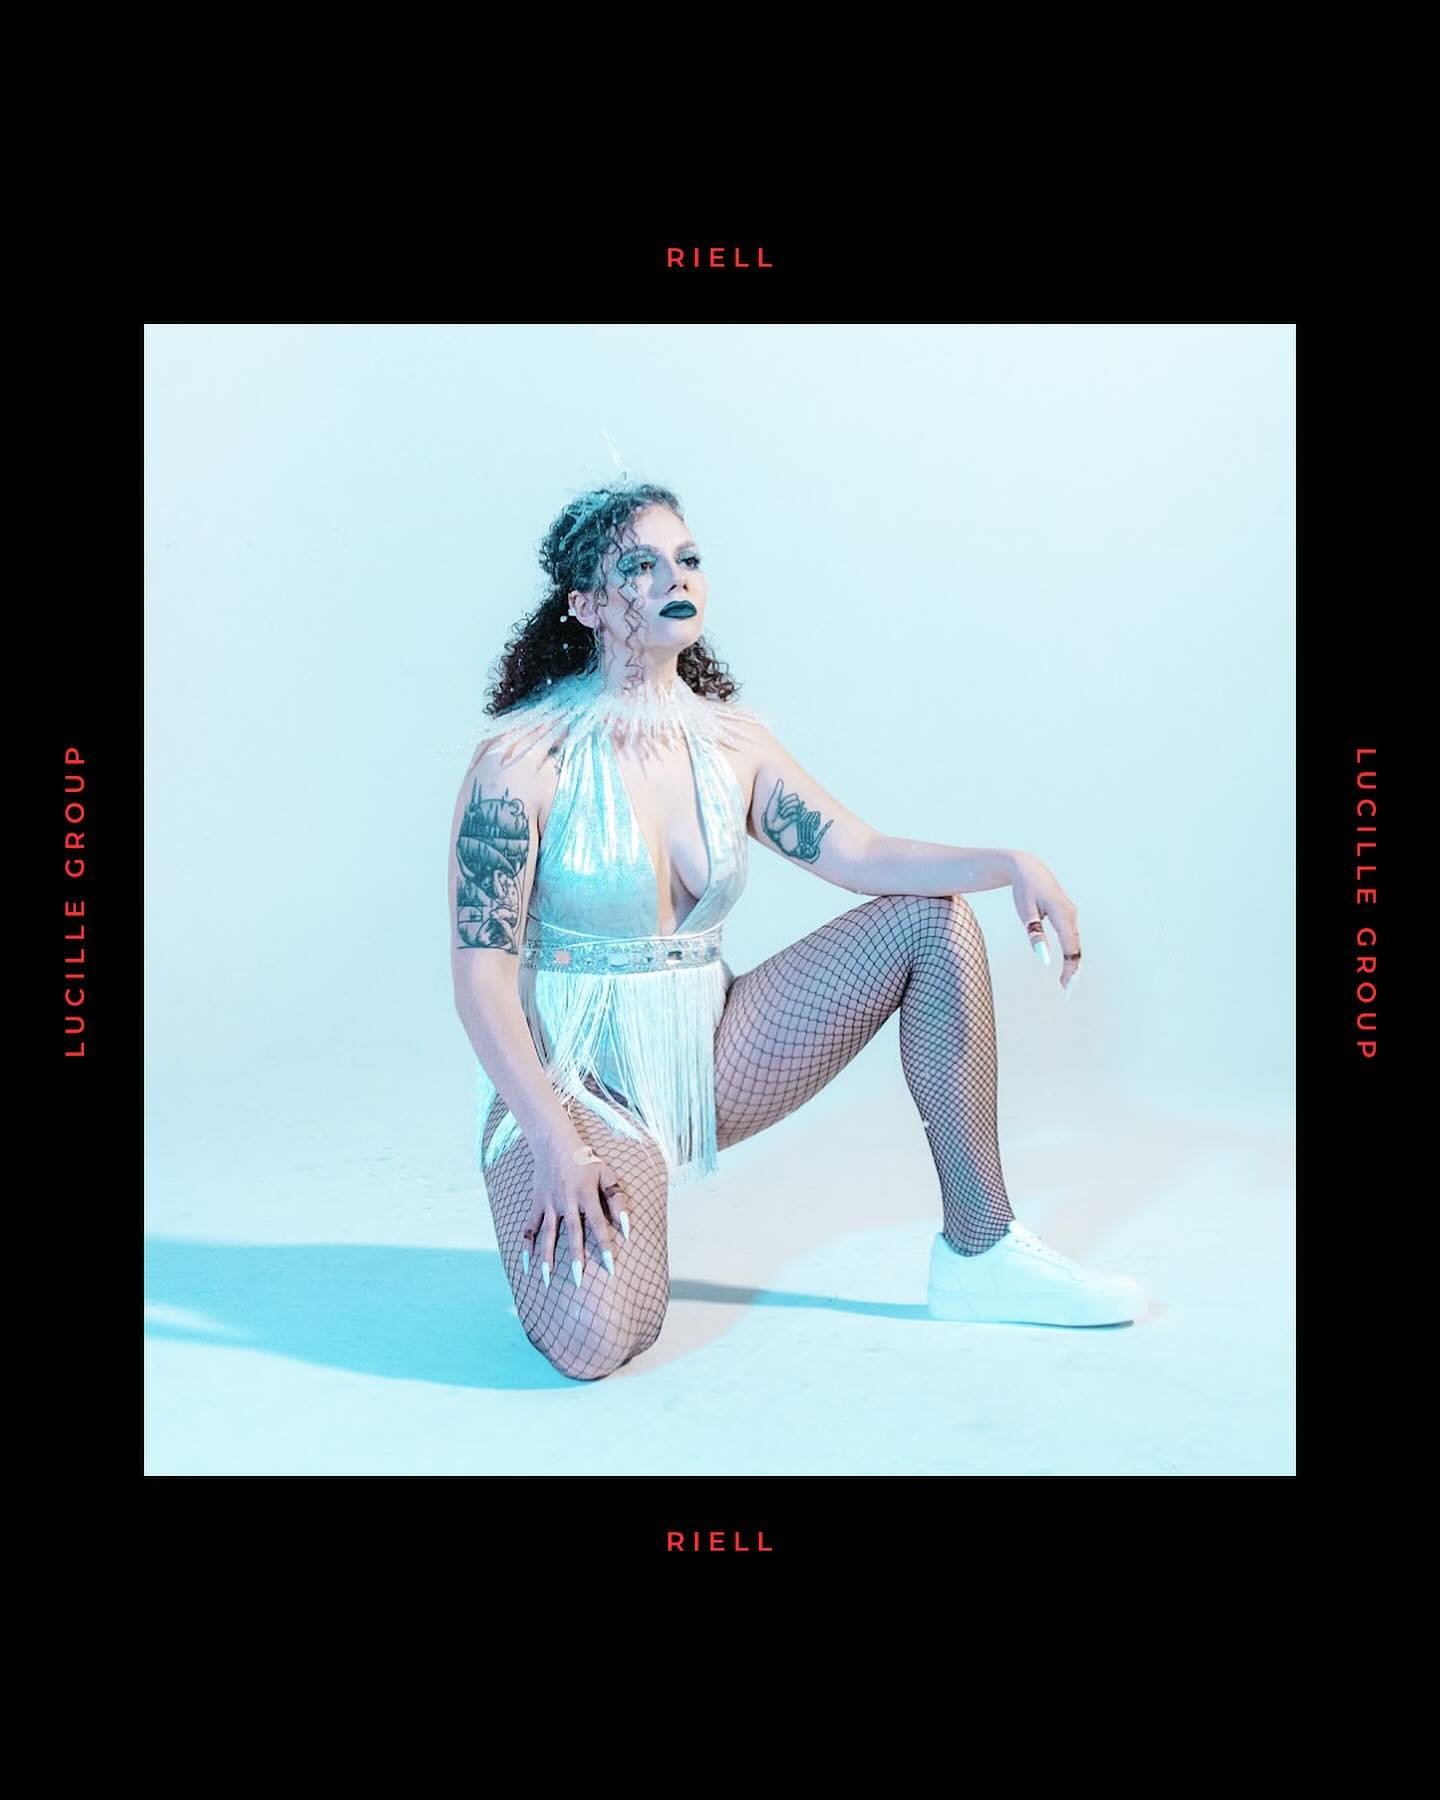 Say hi to our new partner RIELL!

@iamriell released her debut EP &ldquo;PARADISE&rdquo; in 2020, but has been a widely popular topliner in the industry for many years. The Canadian Dance Pop artist is also a songwriter, producer and a master at perf